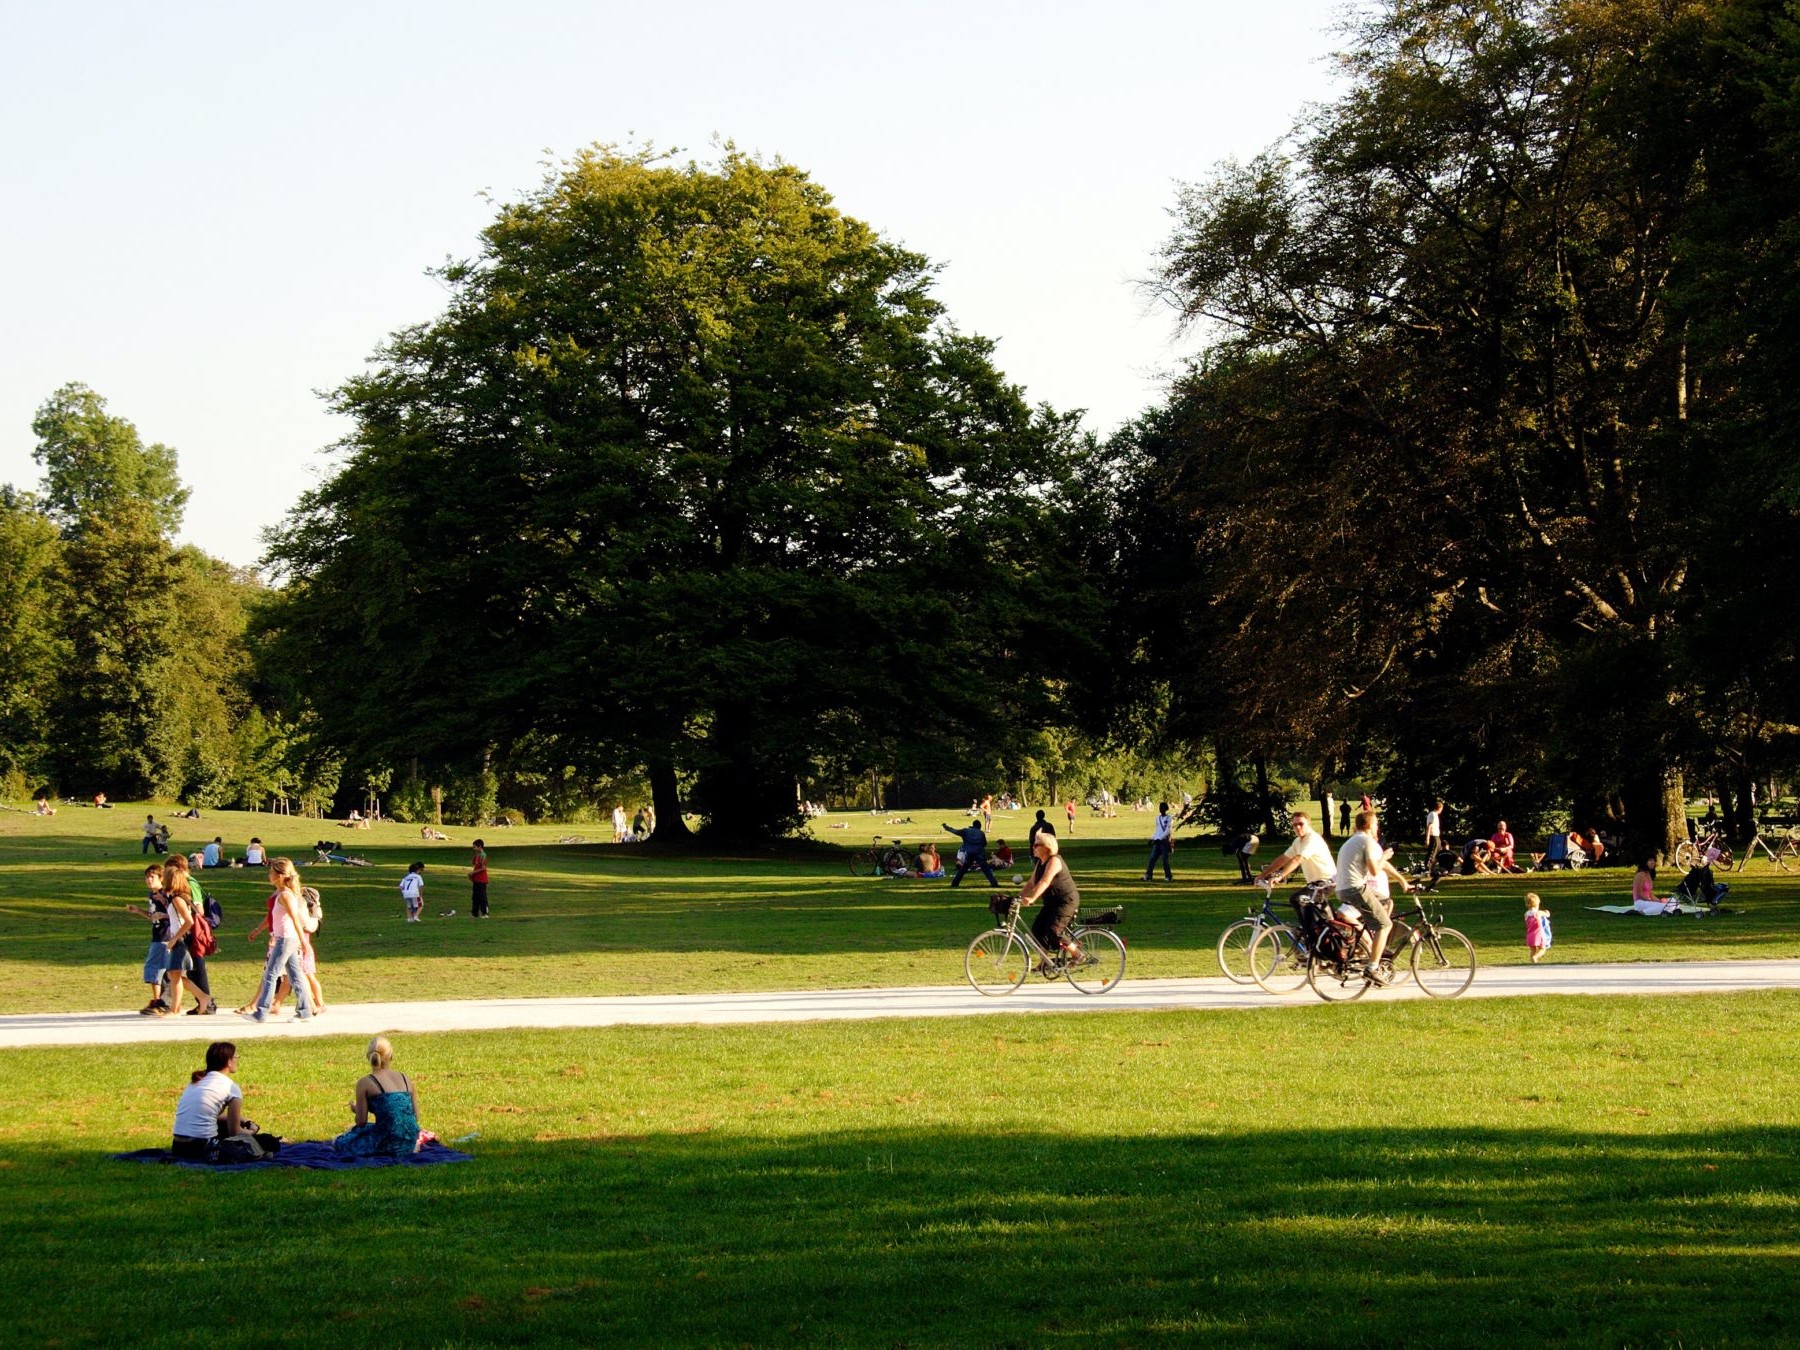 People Relaxing in Park